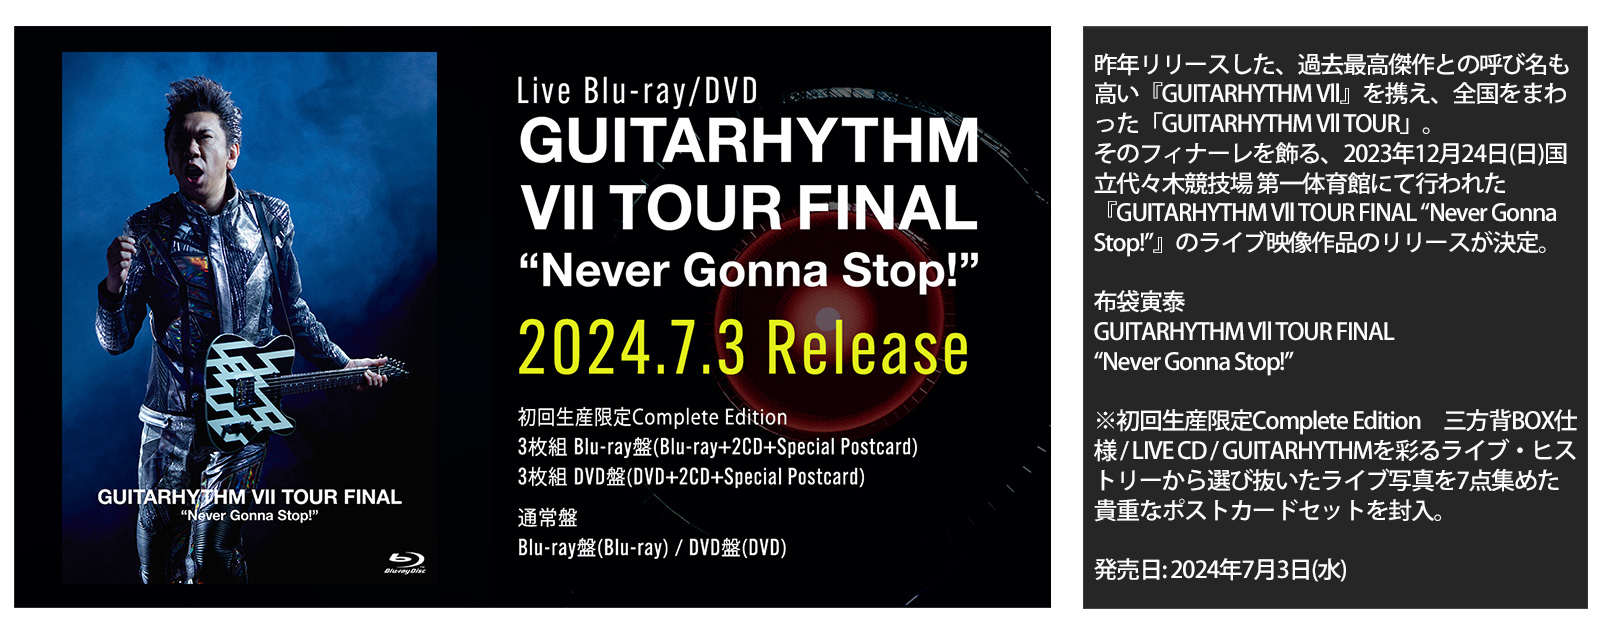 Live Blu-ray/DVD GUITARHYTHM Ⅶ TOUR FINAL "Never Gonna Stop!" 2024.7.3 Release